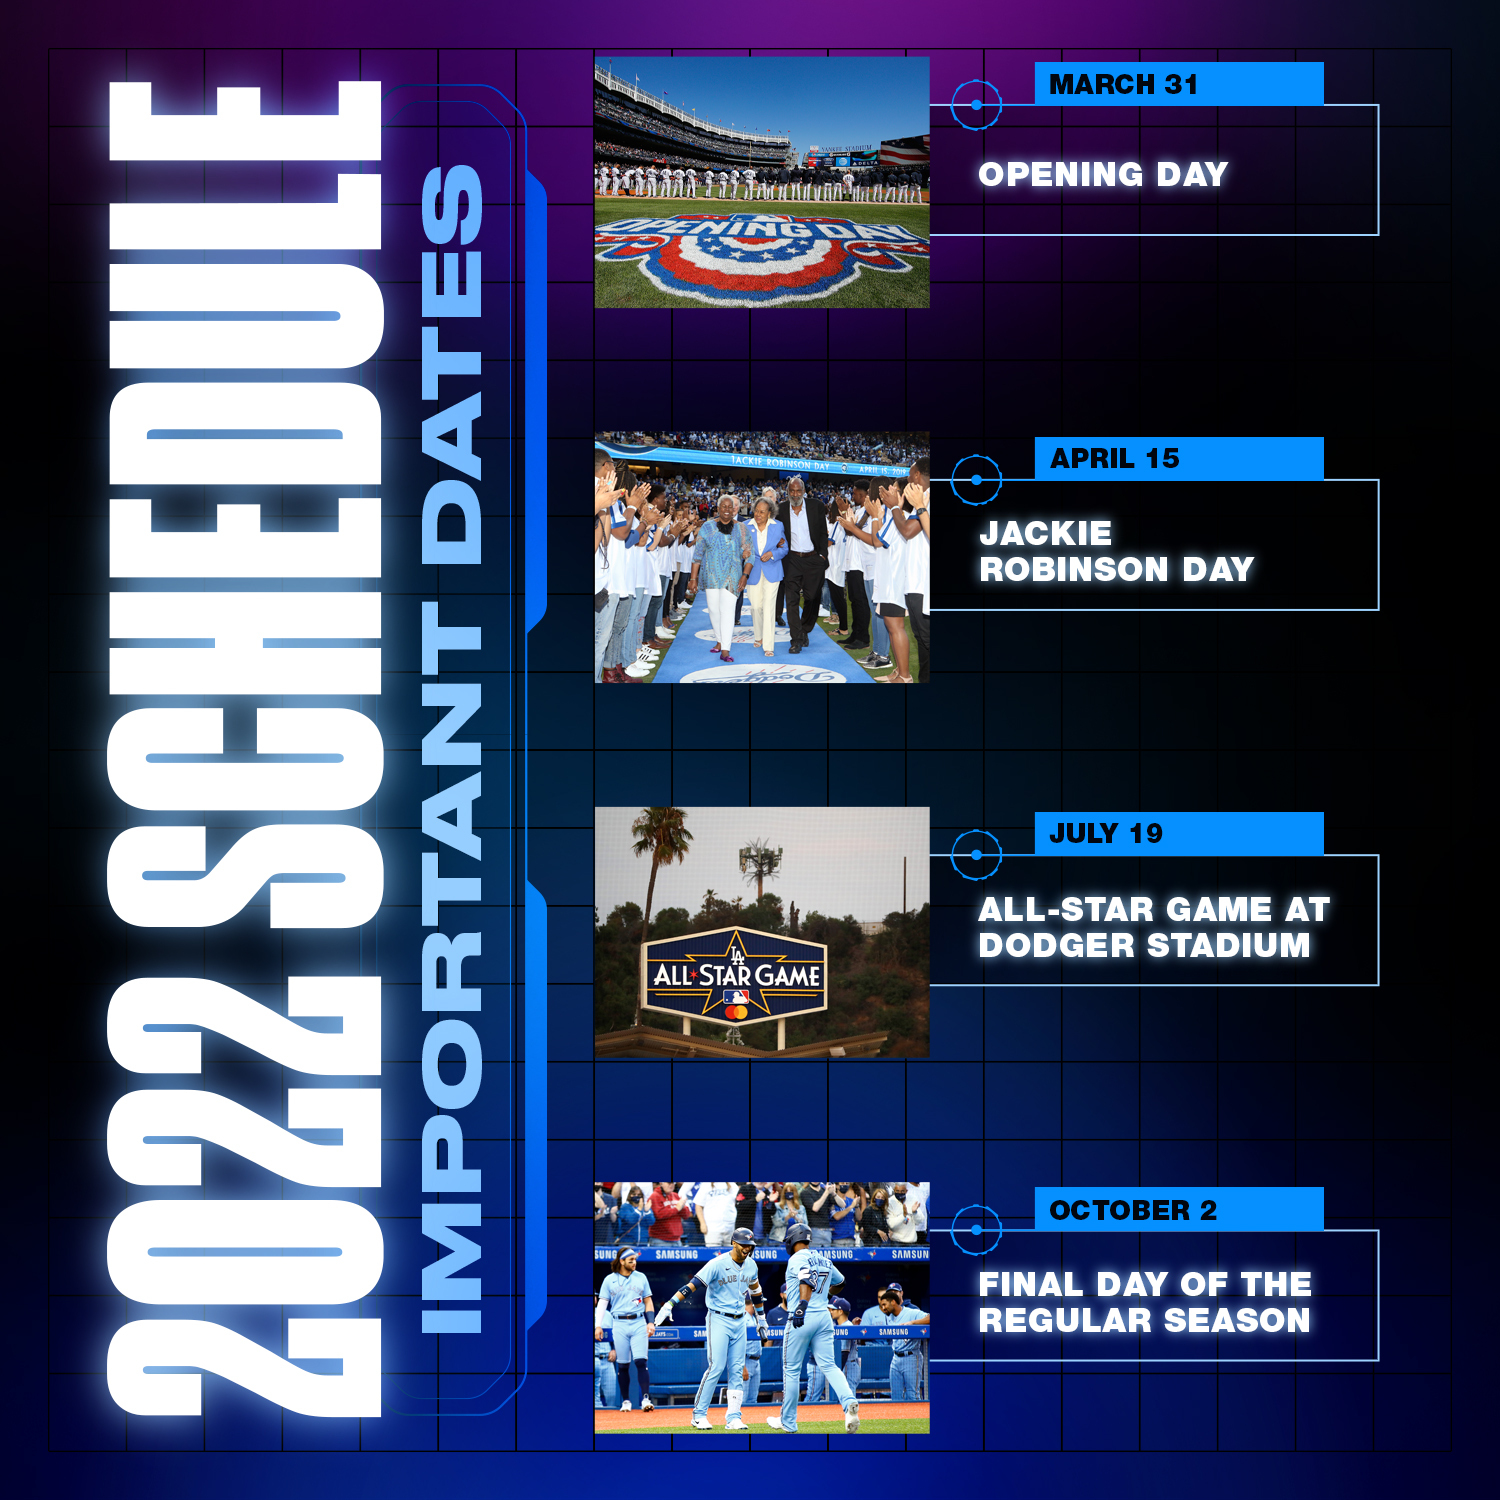 Mlb Schedule 2022 Regular Season Mlb On Twitter: "The 2022 Schedule Is Out! Mark Your Calendar Accordingly.  ⬇️ Https://T.co/By19Zgwwbu" / Twitter